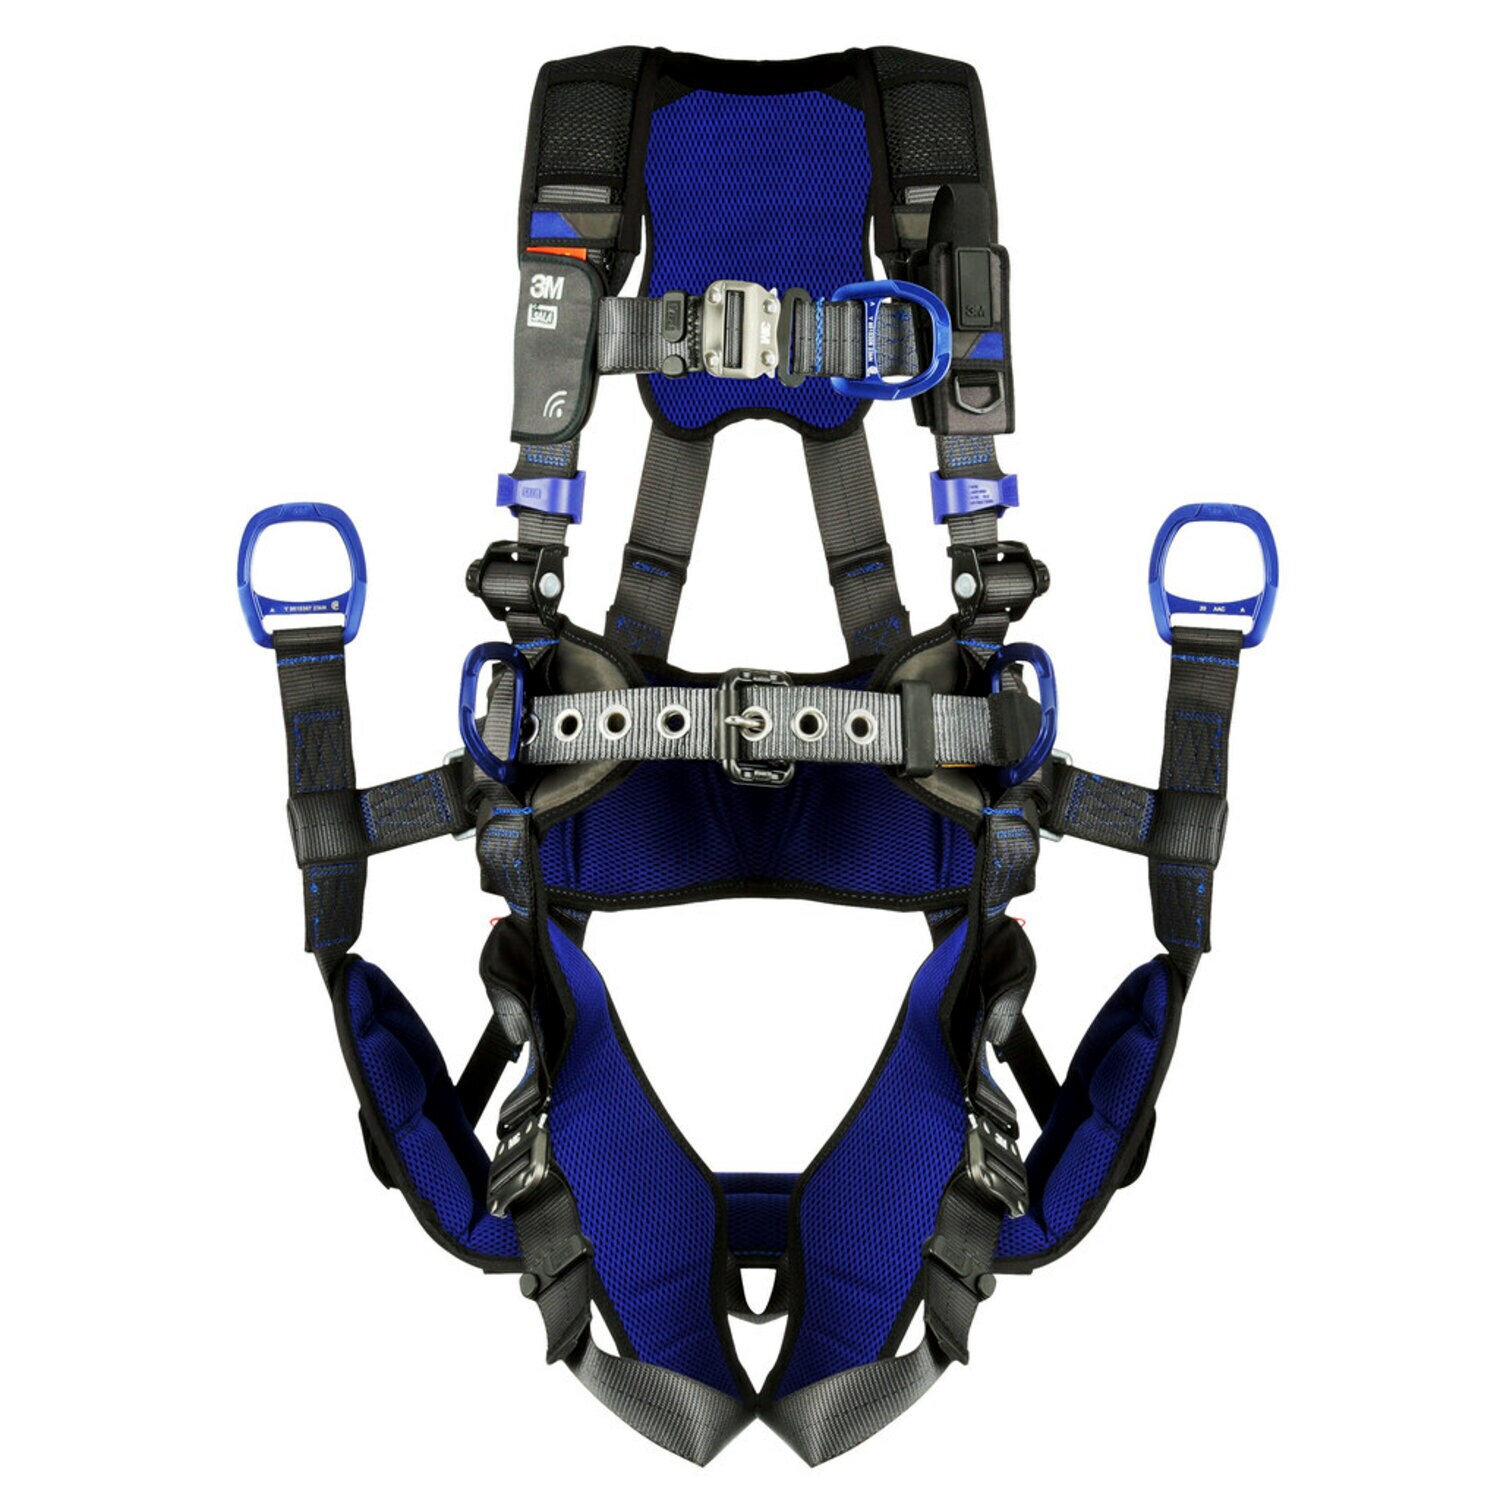 7100188766 - 3M DBI-SALA ExoFit X300 Comfort Tower Climbing/Positioning/Suspension Safety Harness 1113192, Large